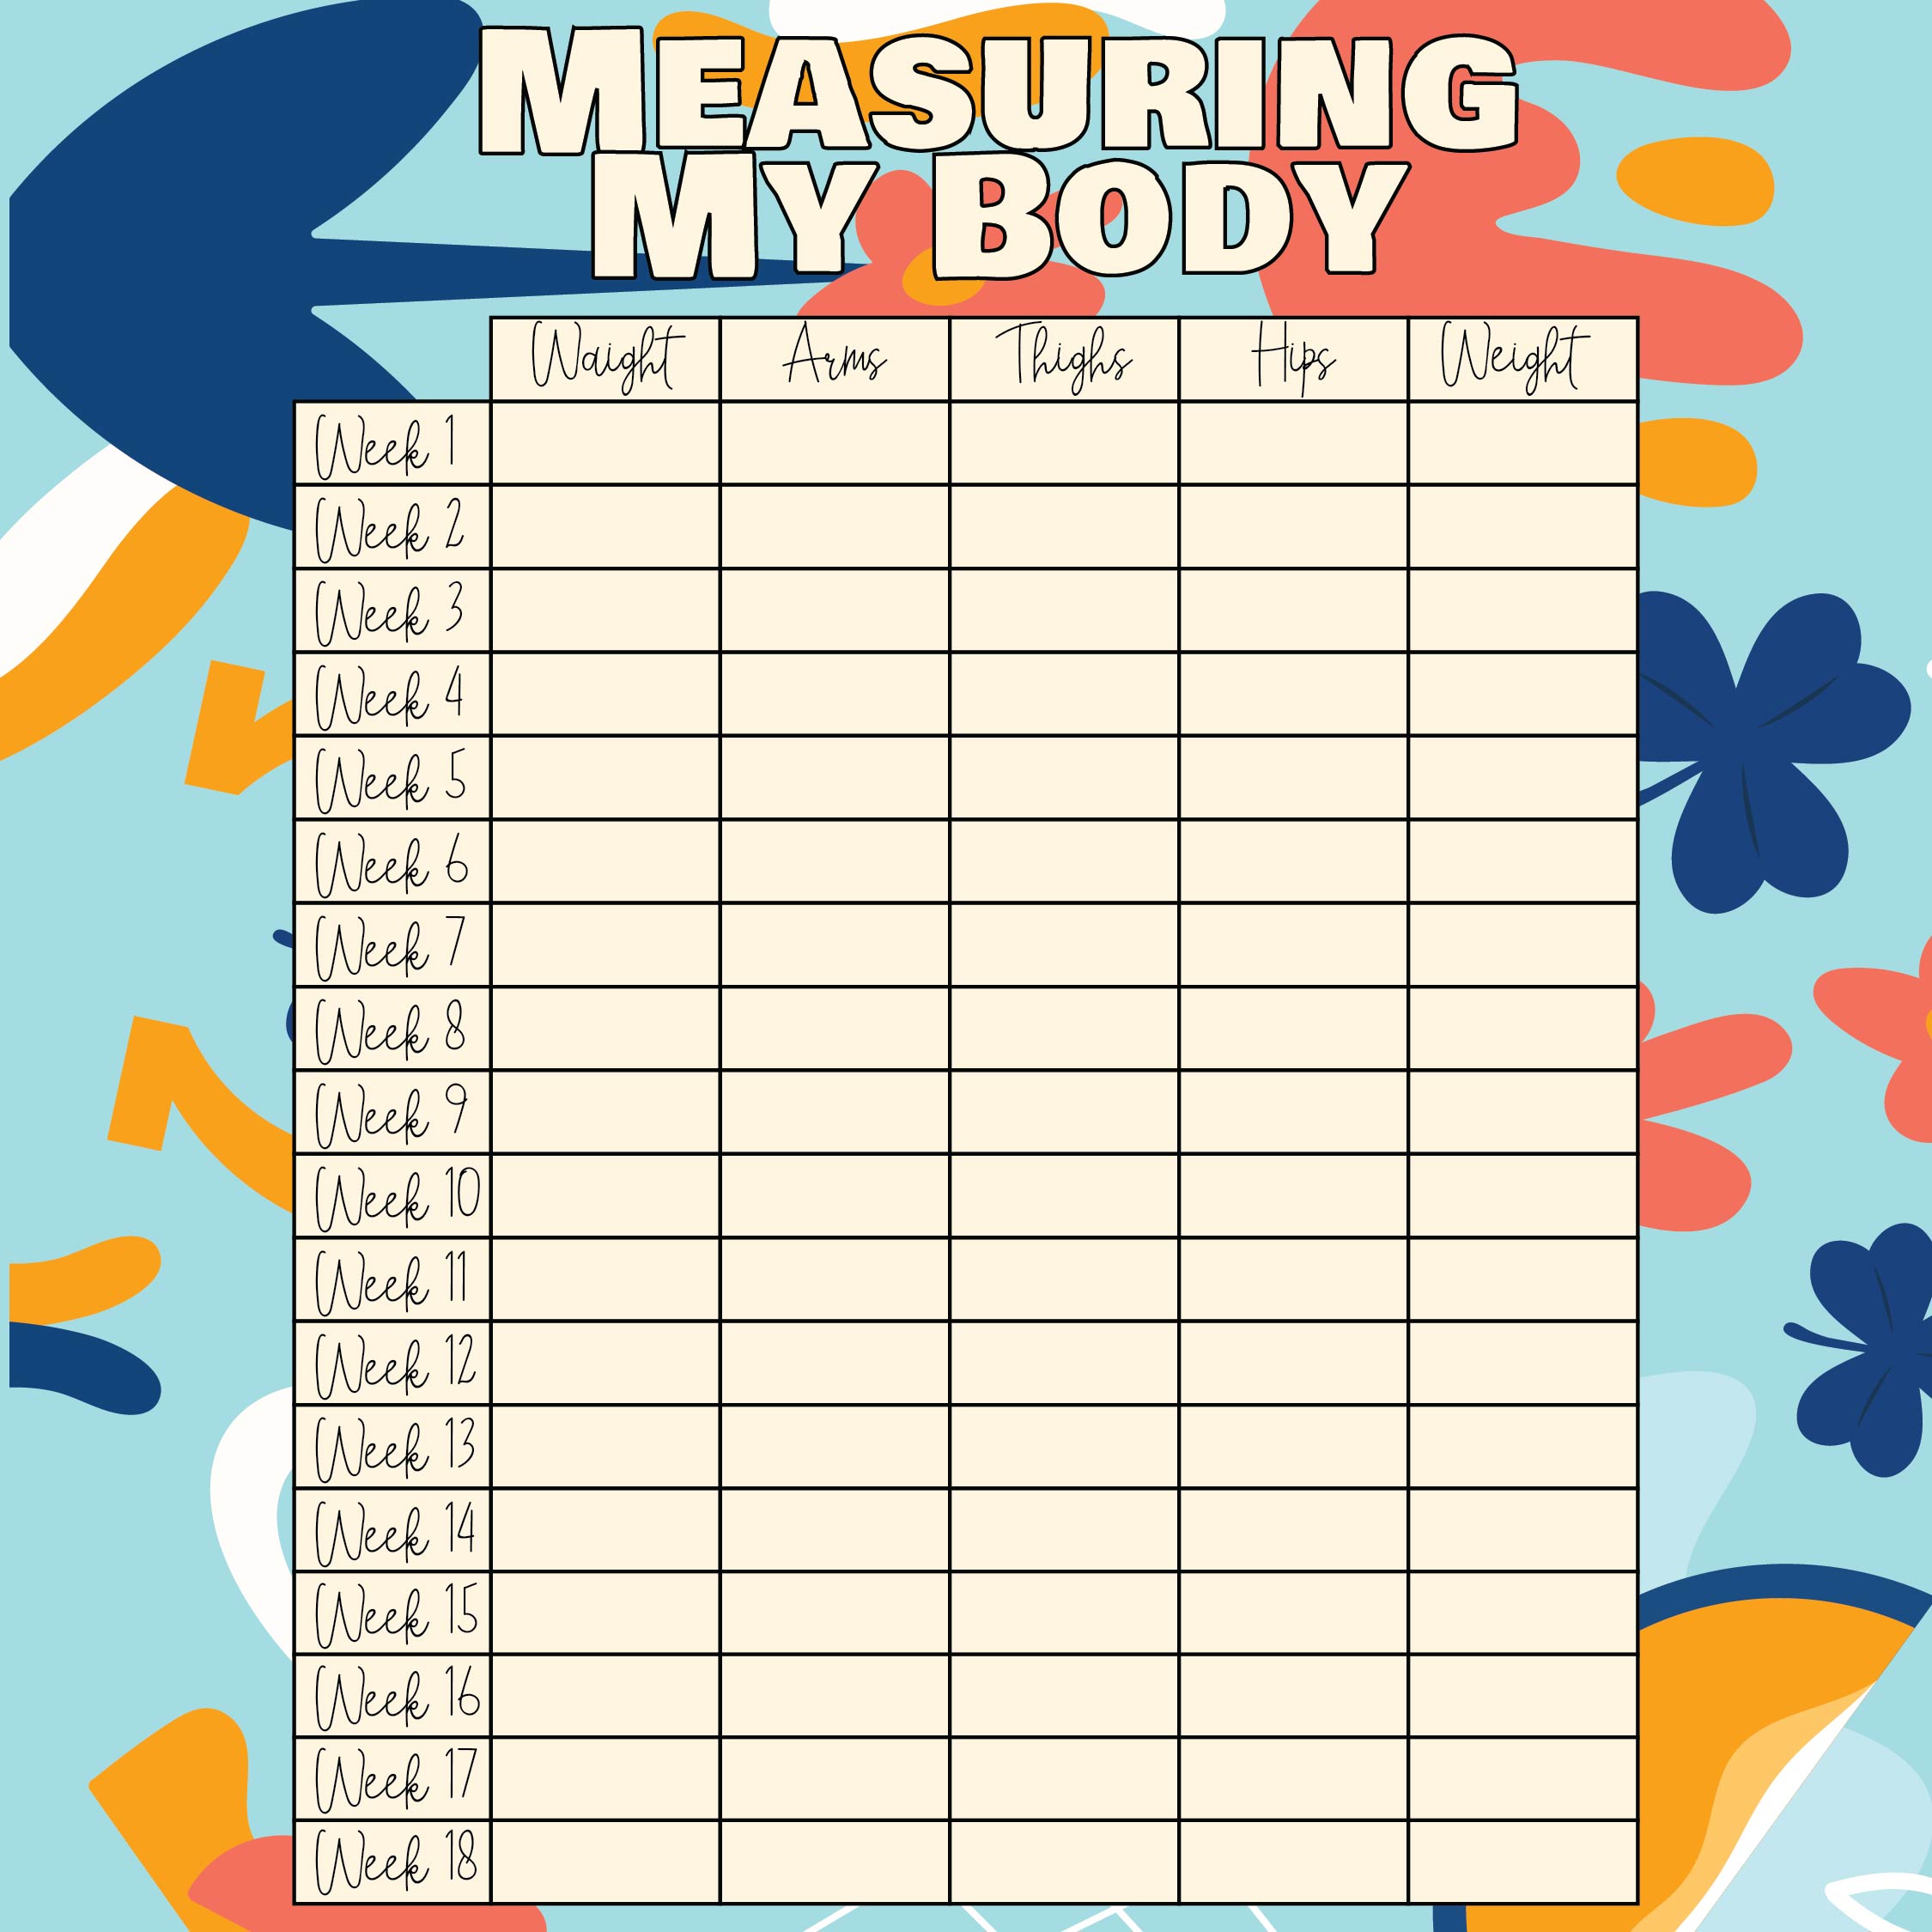 7-best-images-of-printable-measurement-chart-weight-loss-printable-body-measurement-chart